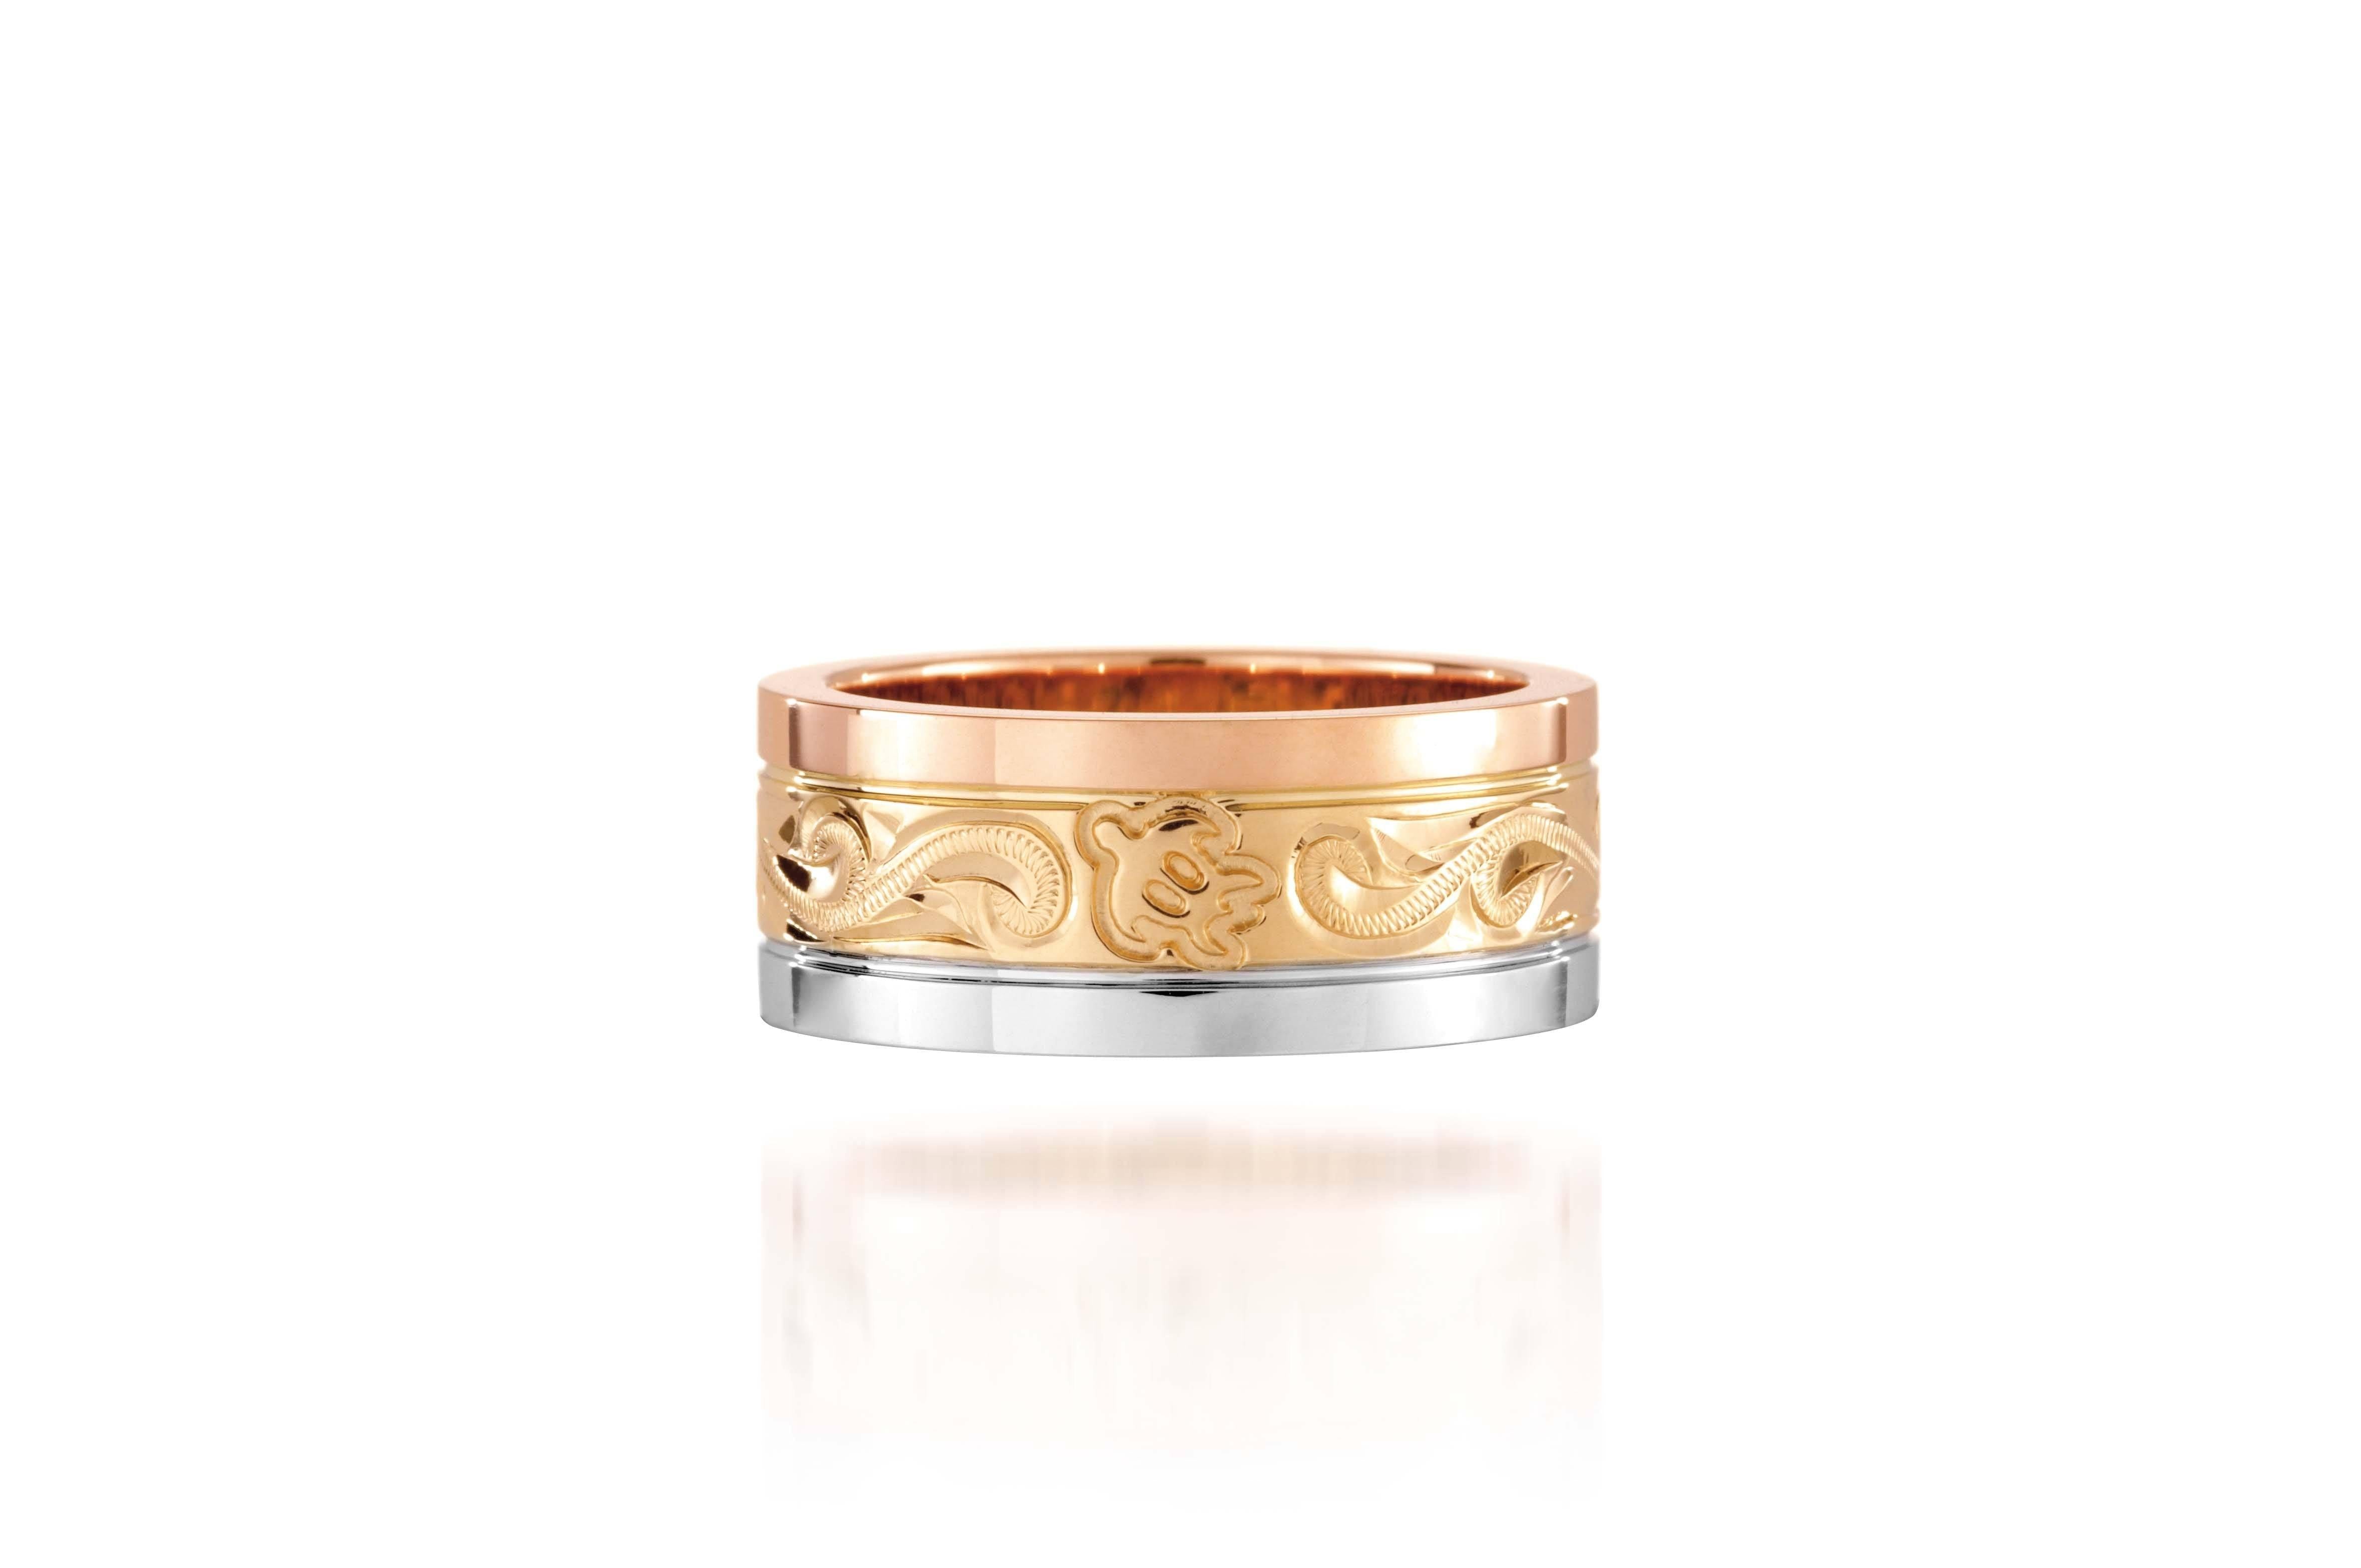 The picture shows a 14K rose, yellow, and white gold tricolor 8mm ring with hand engravings including sea turtles.